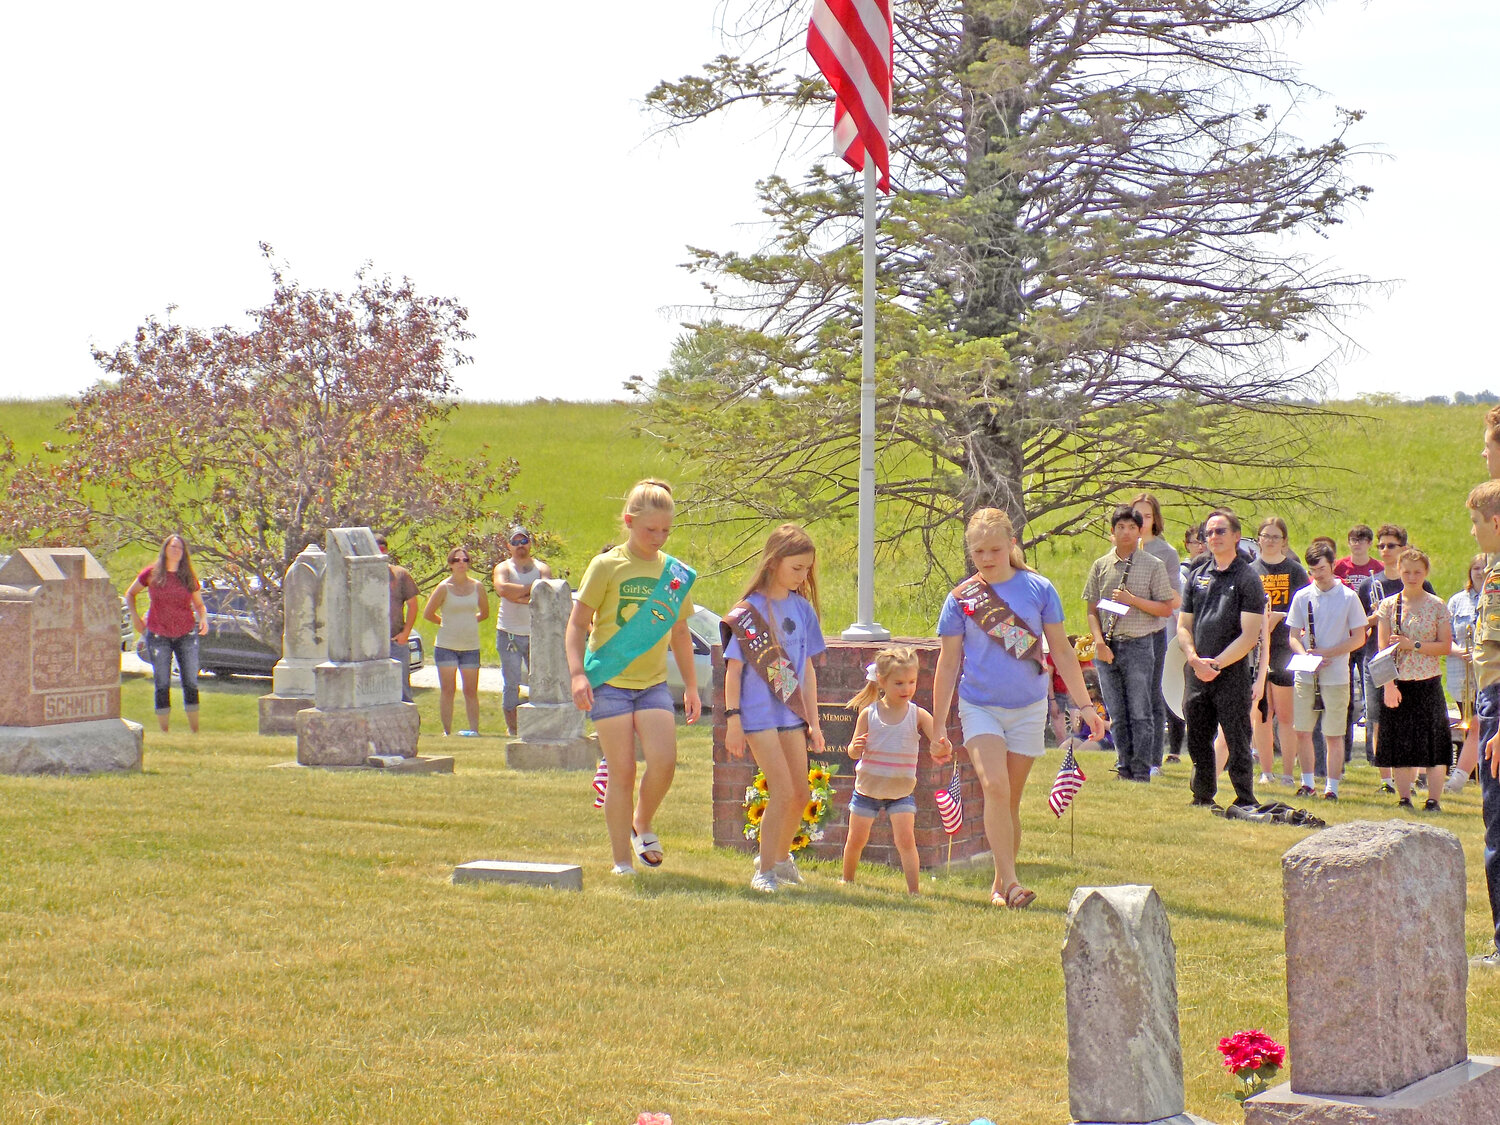 The Girl Scouts place a wreath in remembrance of servicemembers at Richmond Catholic Cemetery.